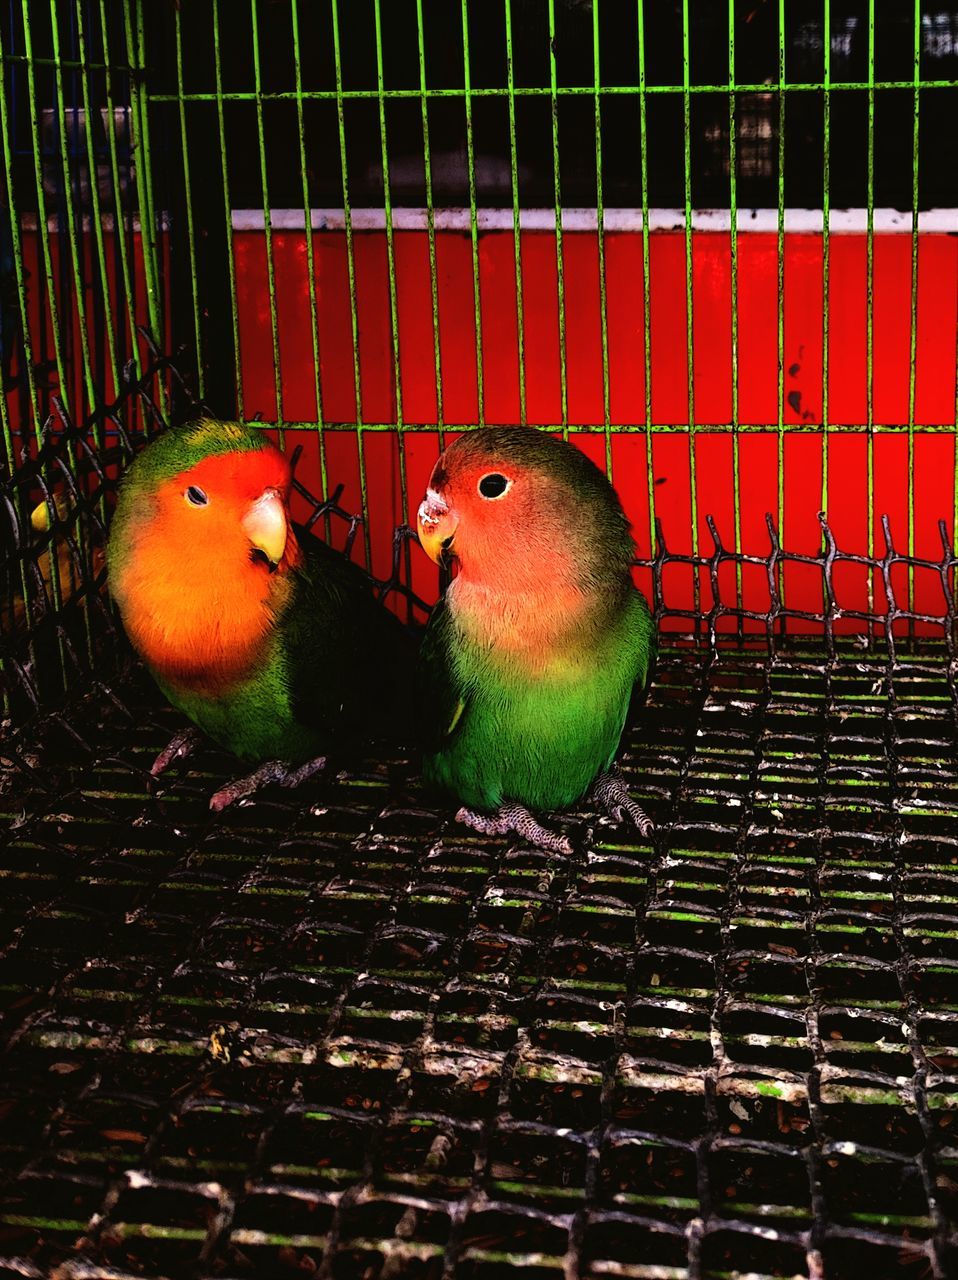 animal themes, animal, bird, cage, group of animals, pet, birdcage, lovebird, parrot, animal wildlife, no people, animals in captivity, metal, parakeet, beak, two animals, red, trapped, nature, close-up